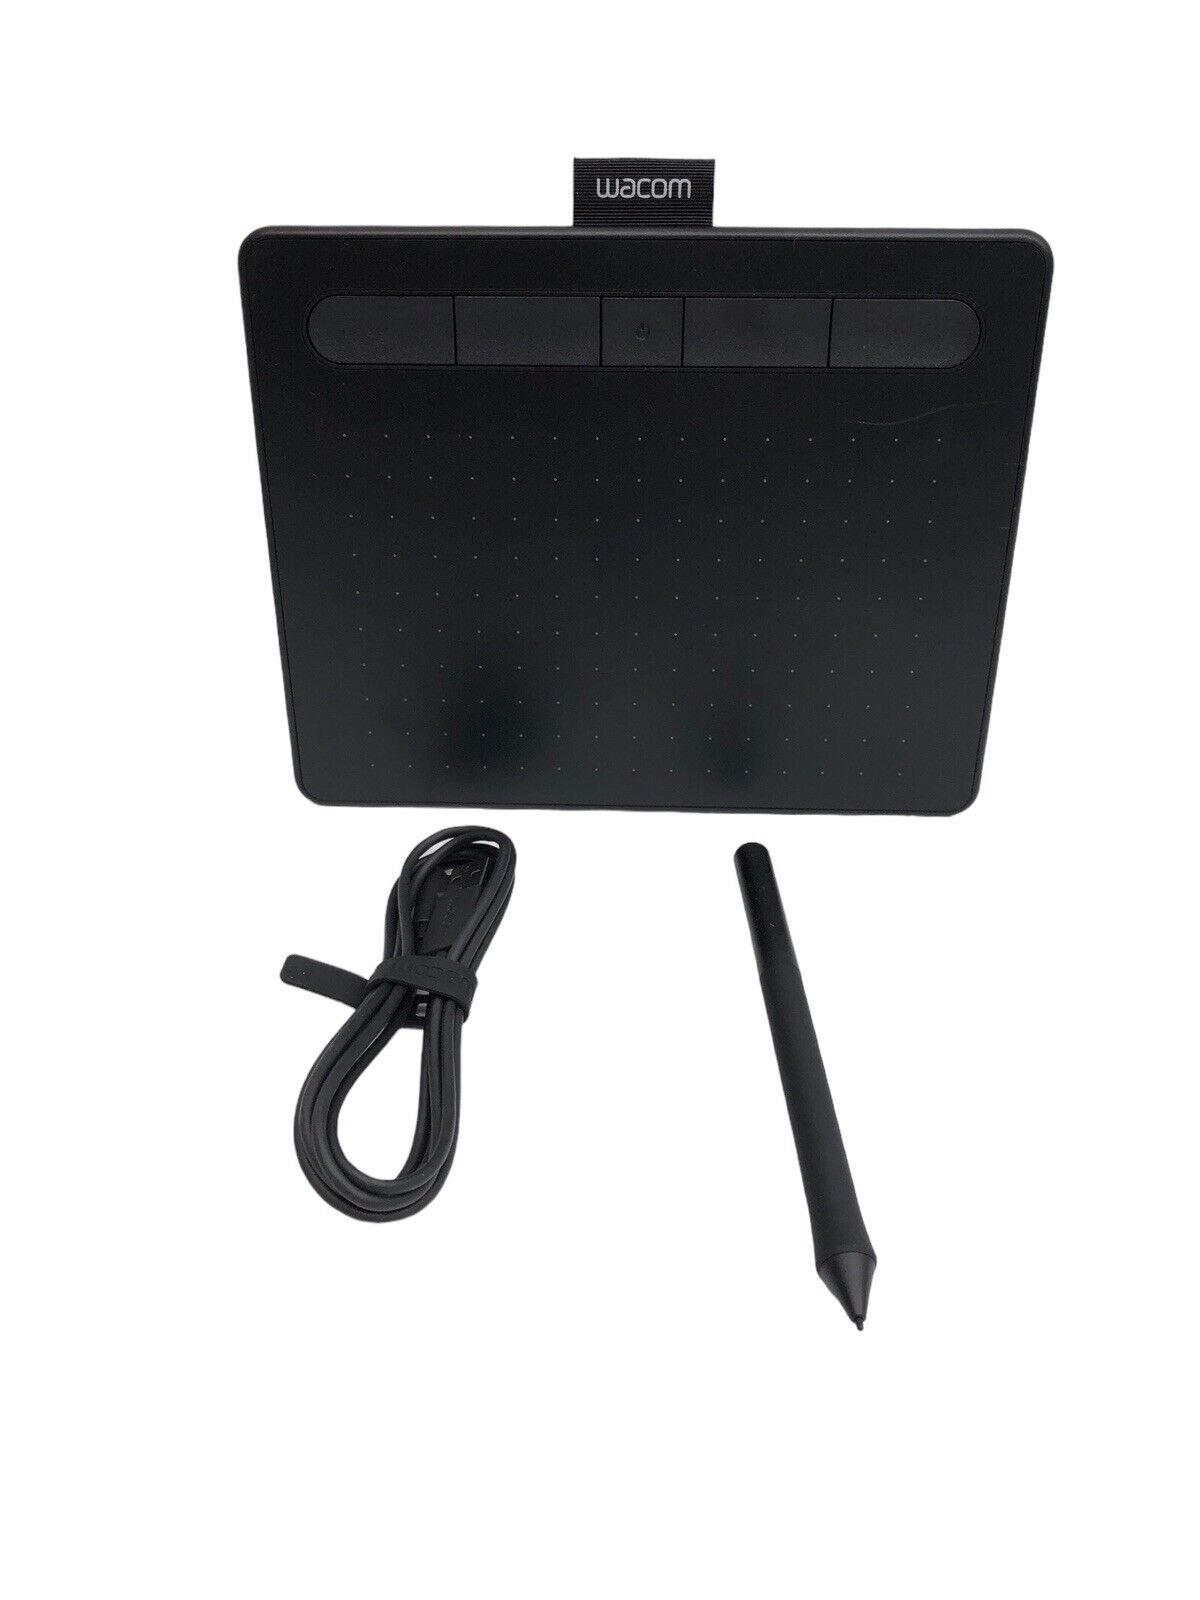 Wacom Intuos Wireless Graphics Drawing Tablet Small Black Portable for Teachers